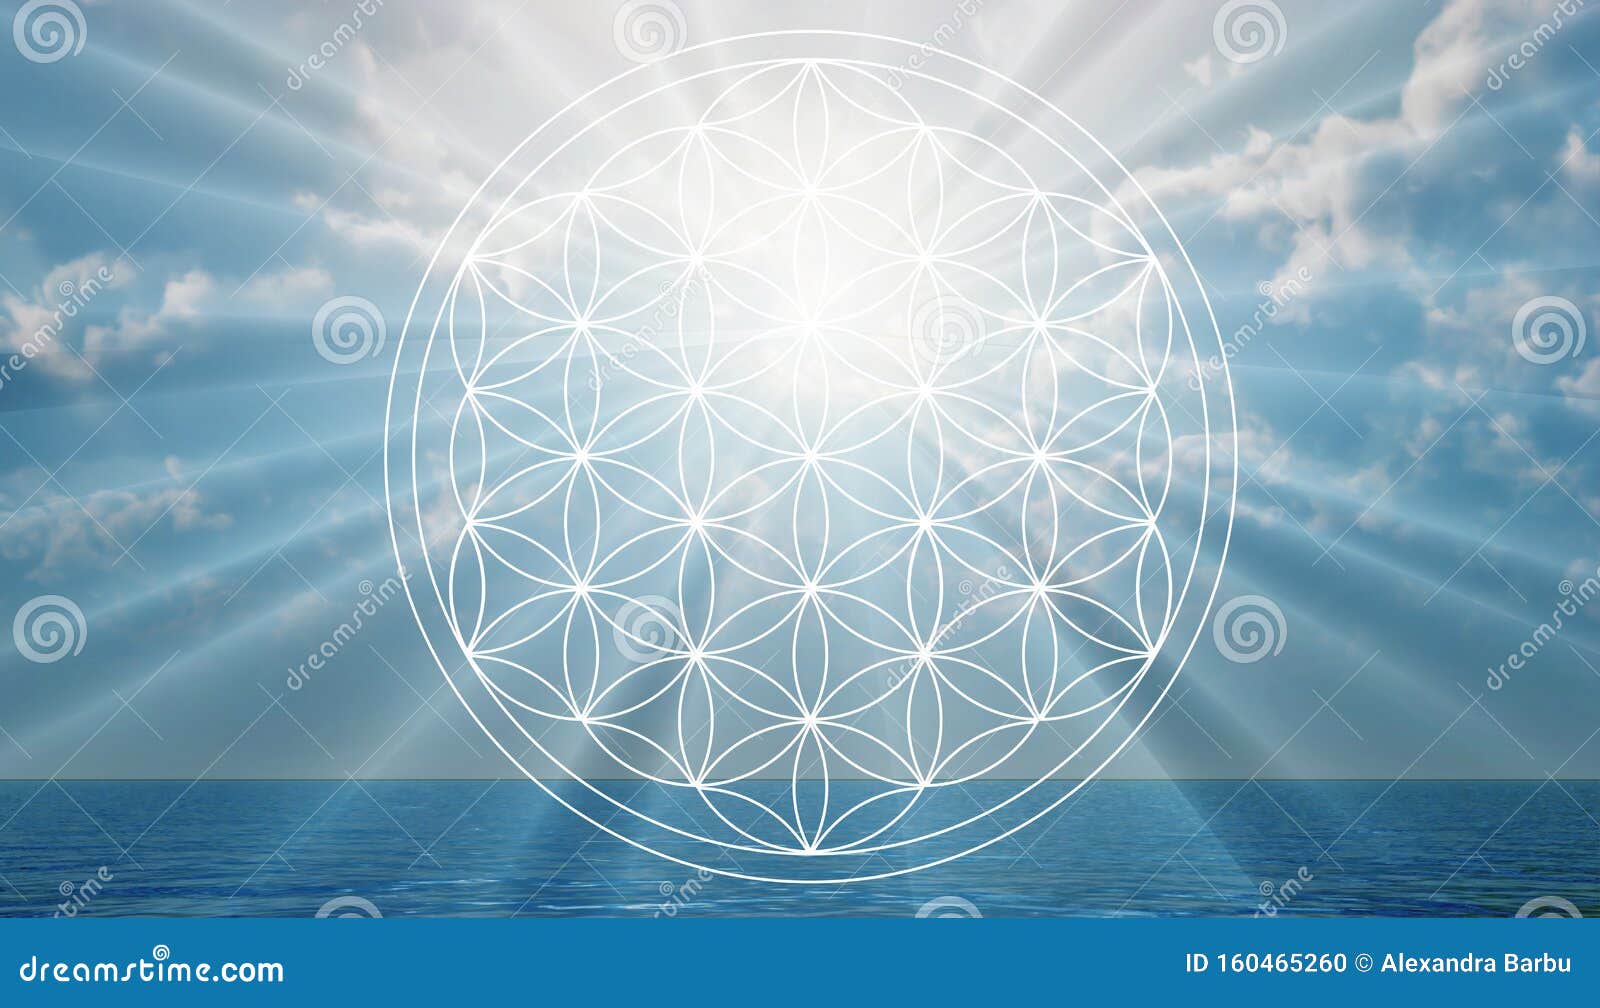 flower of life  in the sky, portal, life